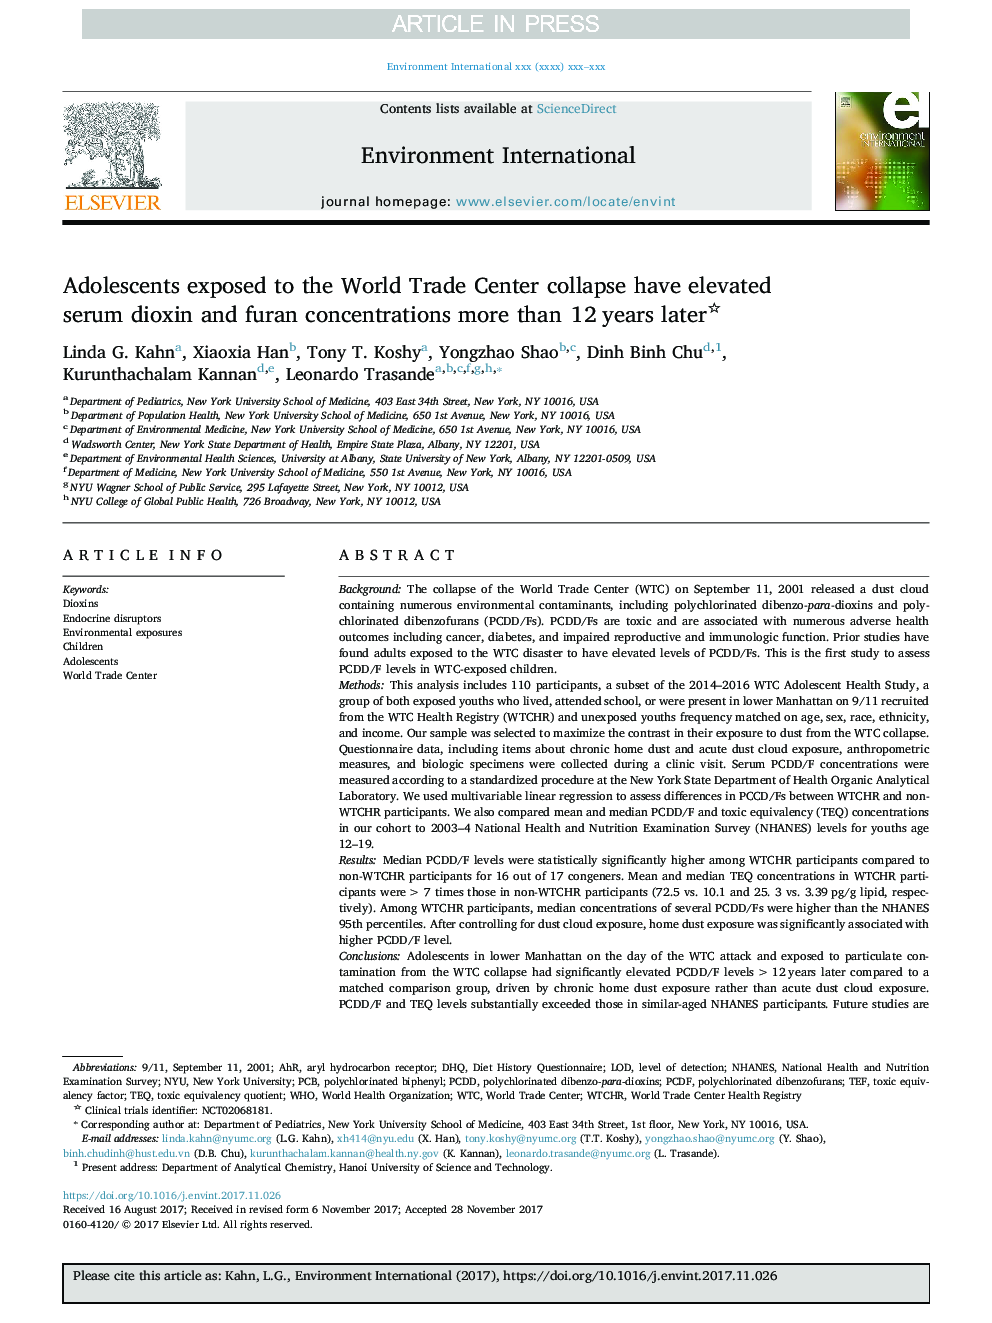 Adolescents exposed to the World Trade Center collapse have elevated serum dioxin and furan concentrations more than Â 12Â years later